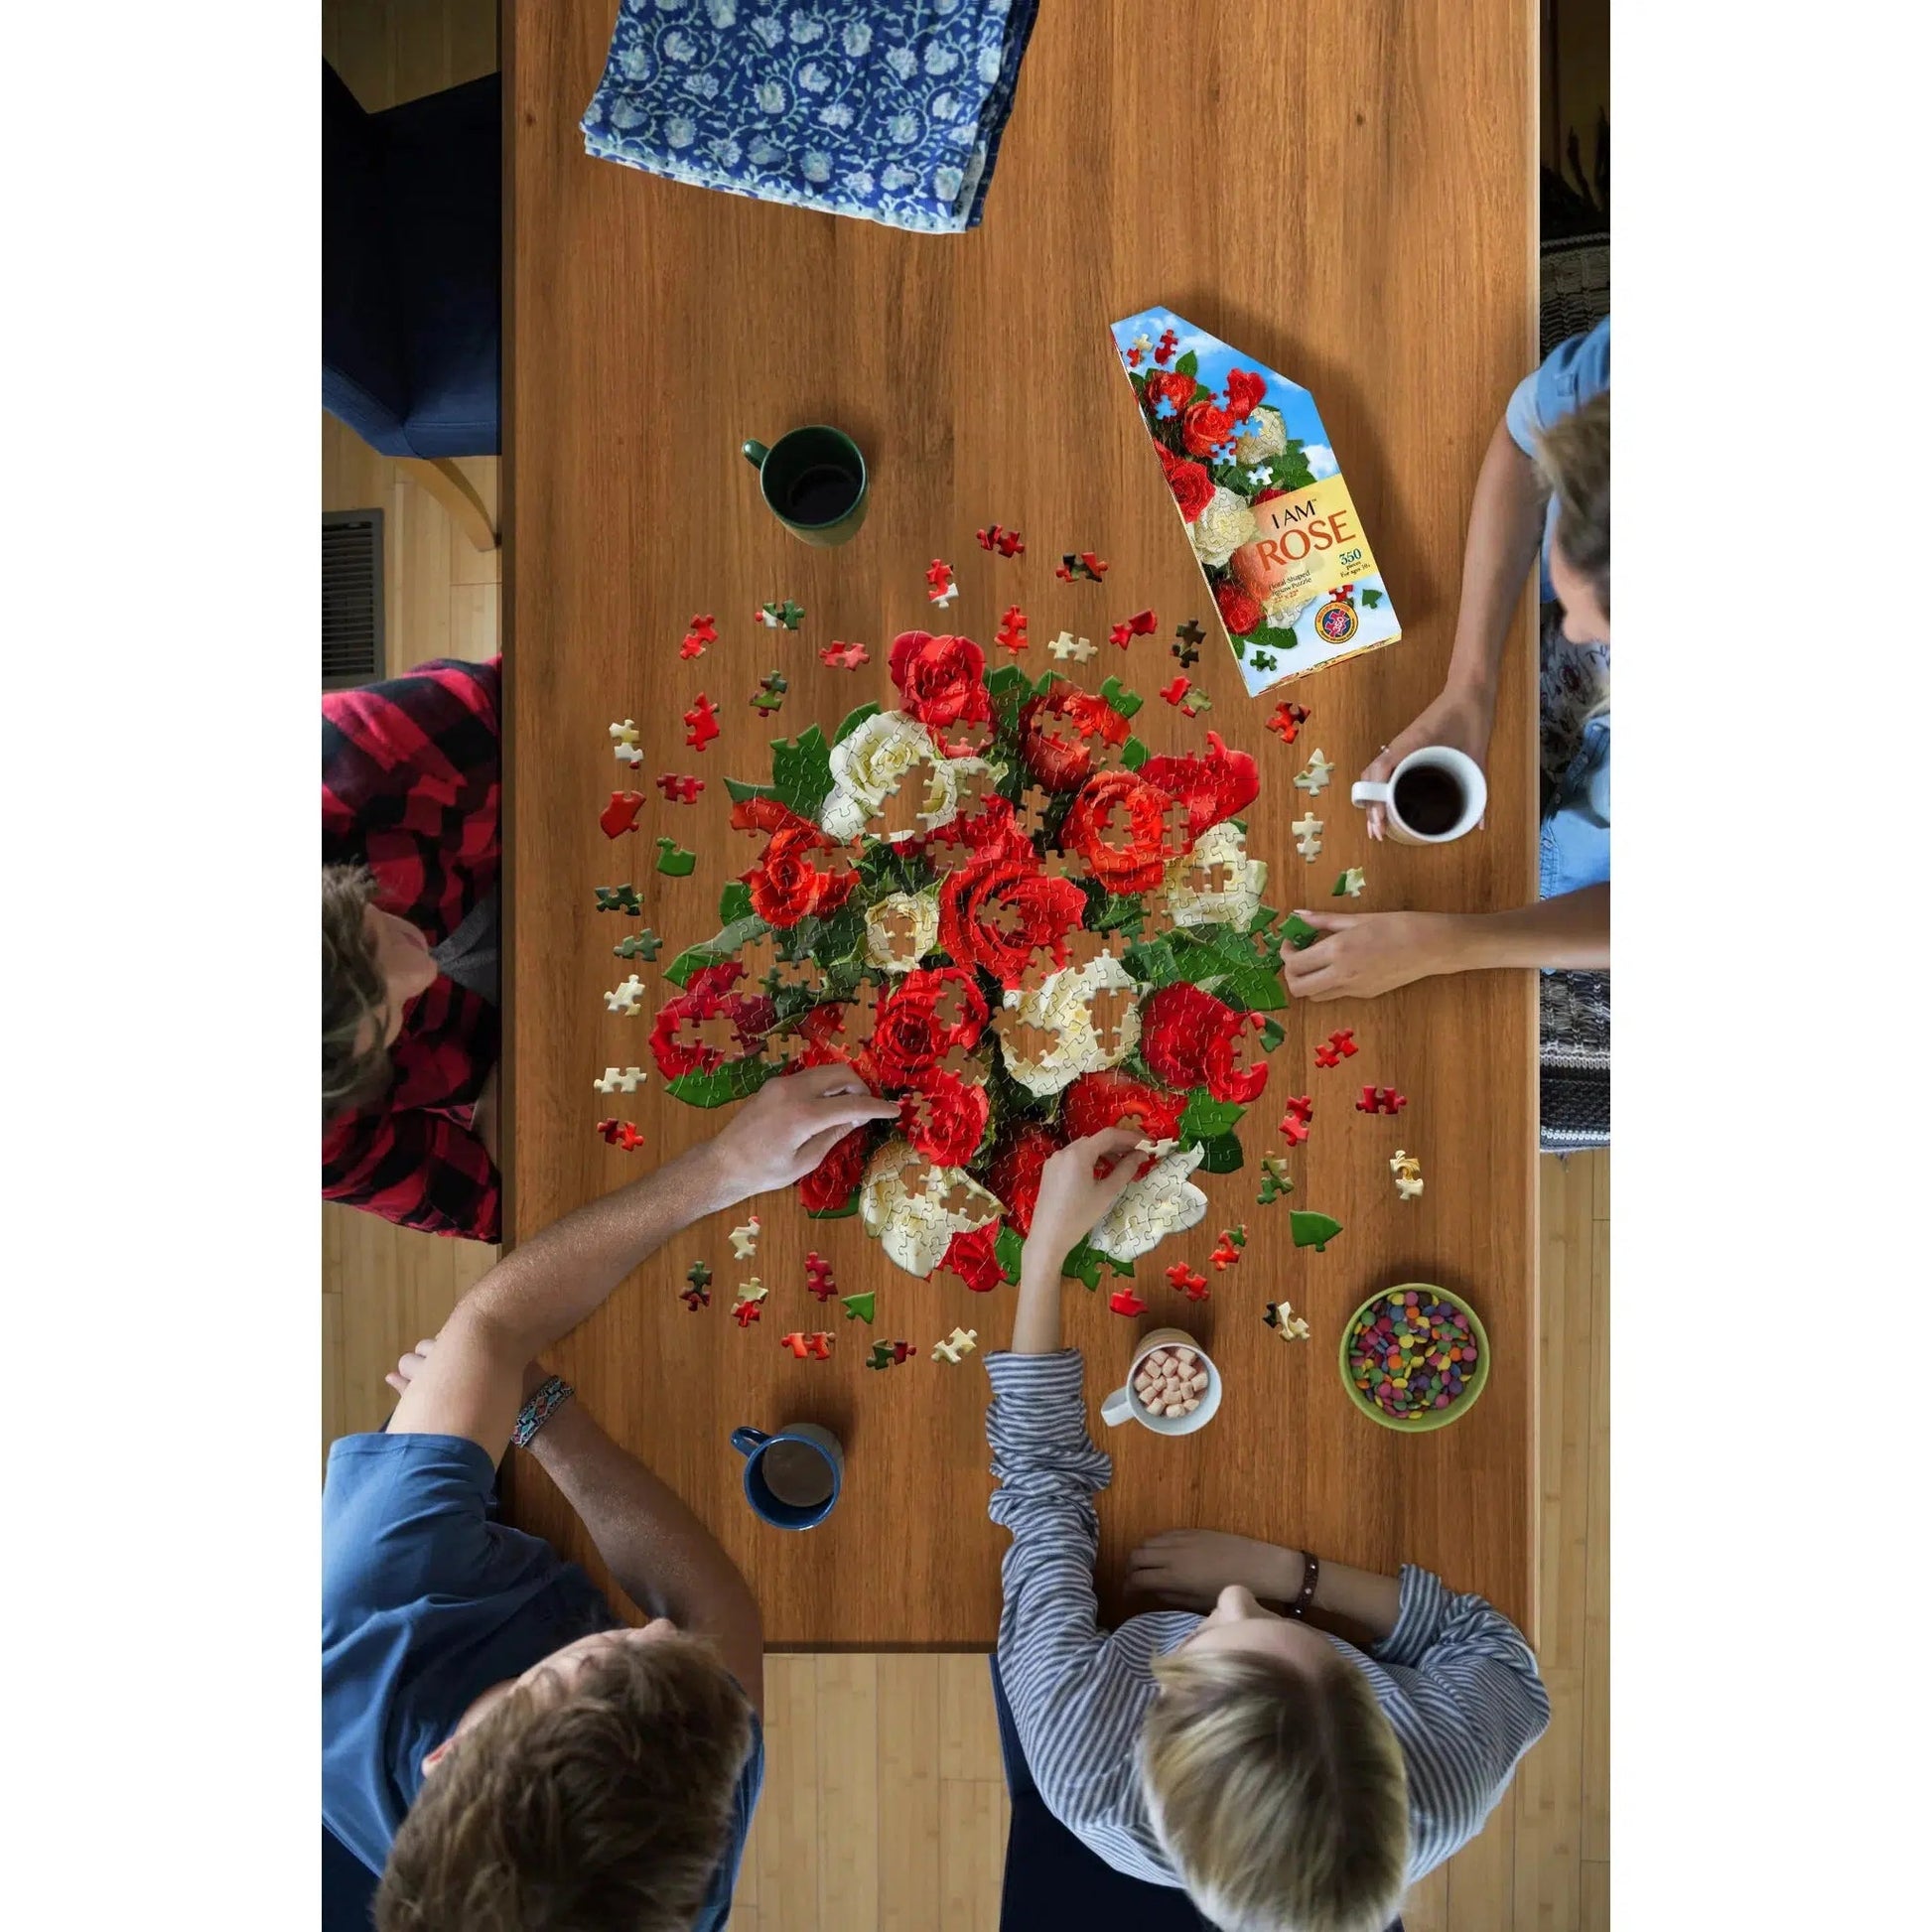 I Am Rose 350 Piece Floral Shaped Jigsaw Puzzle Madd Capp